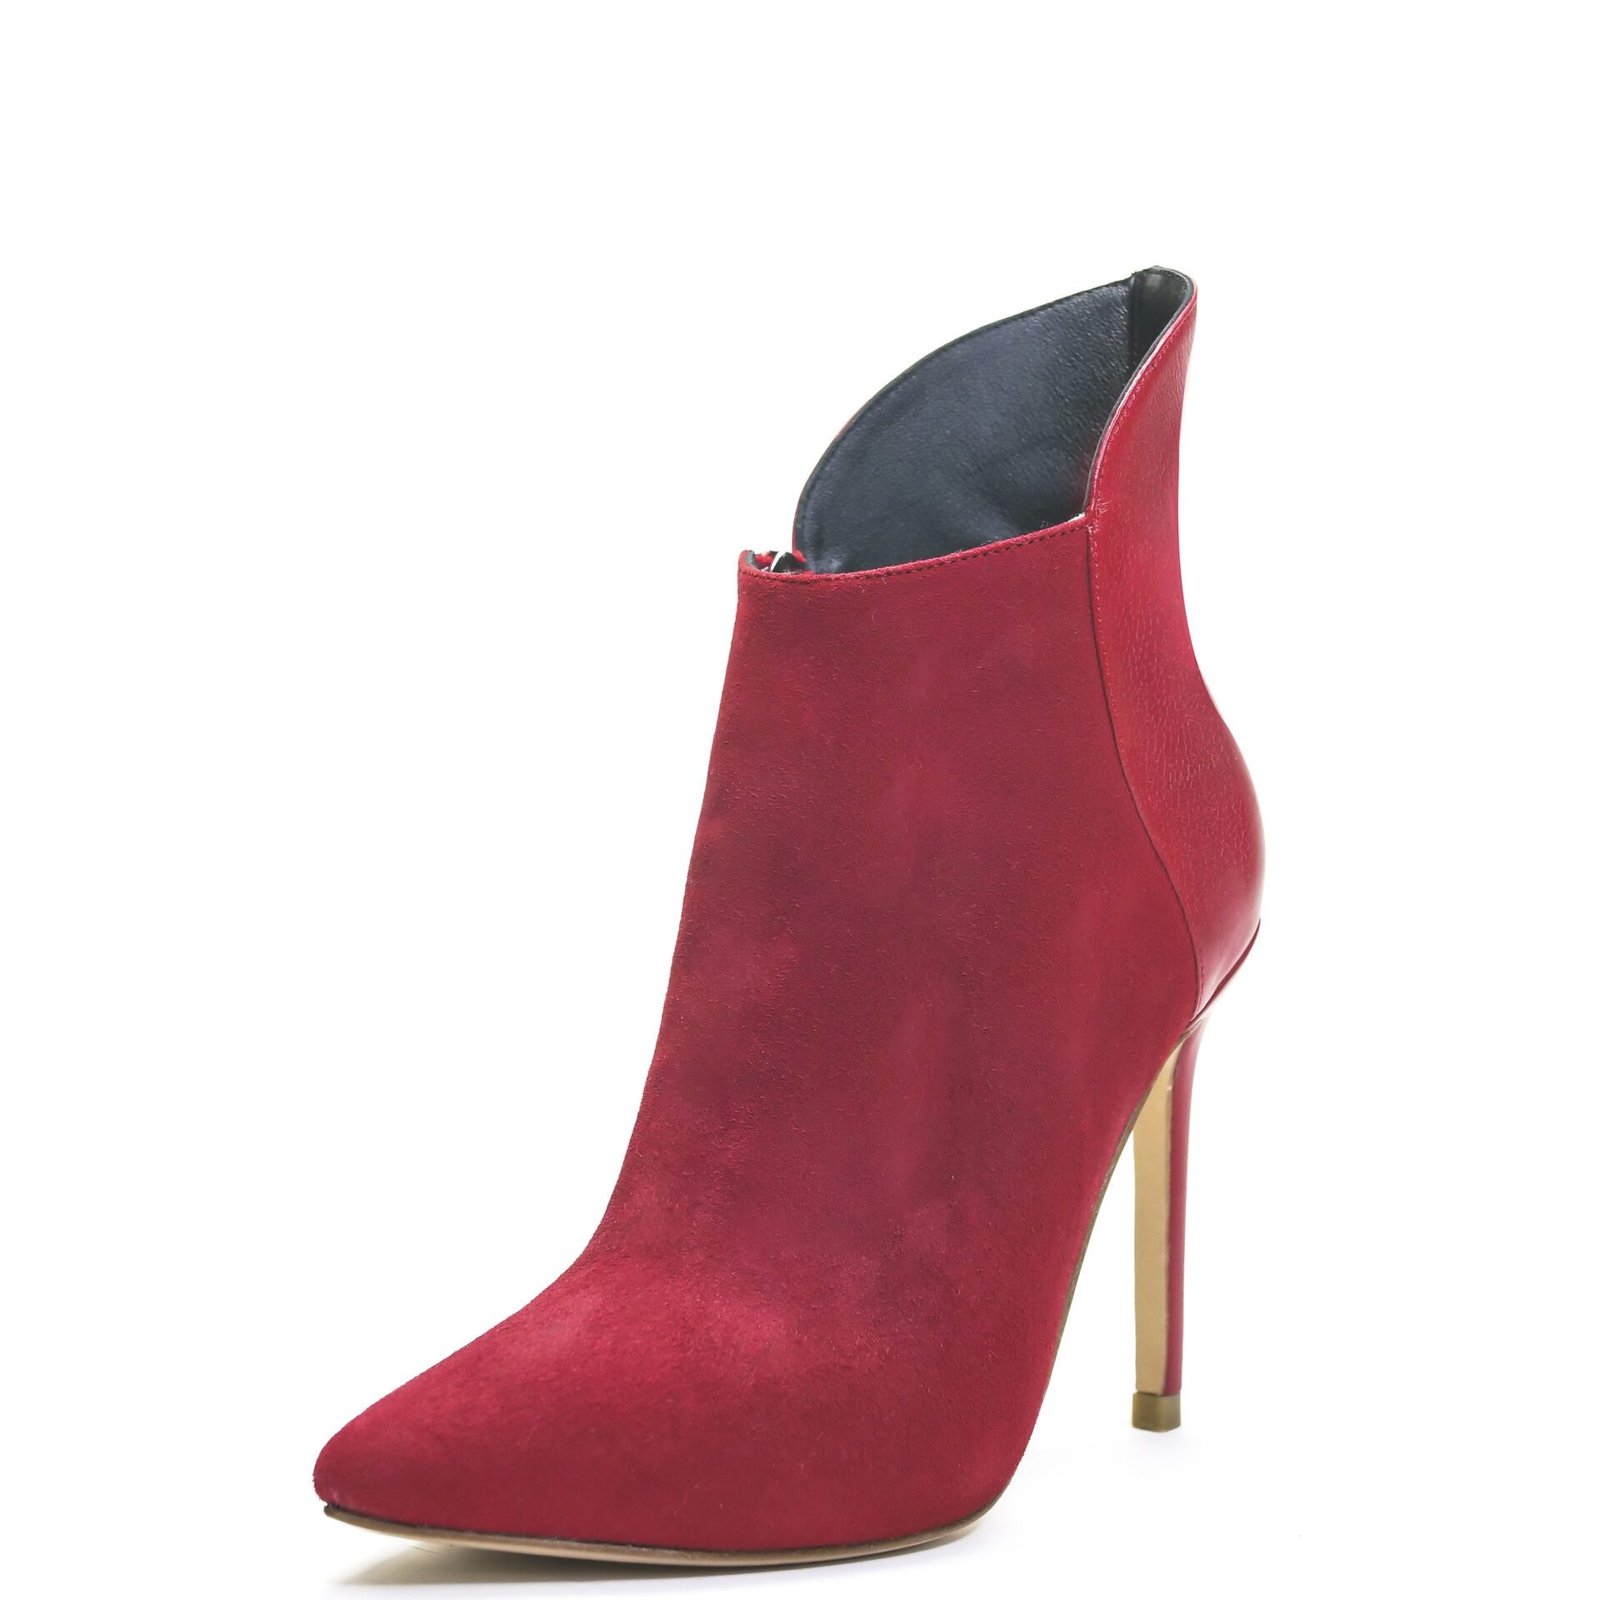 red suede ankle boot high heel for men & women